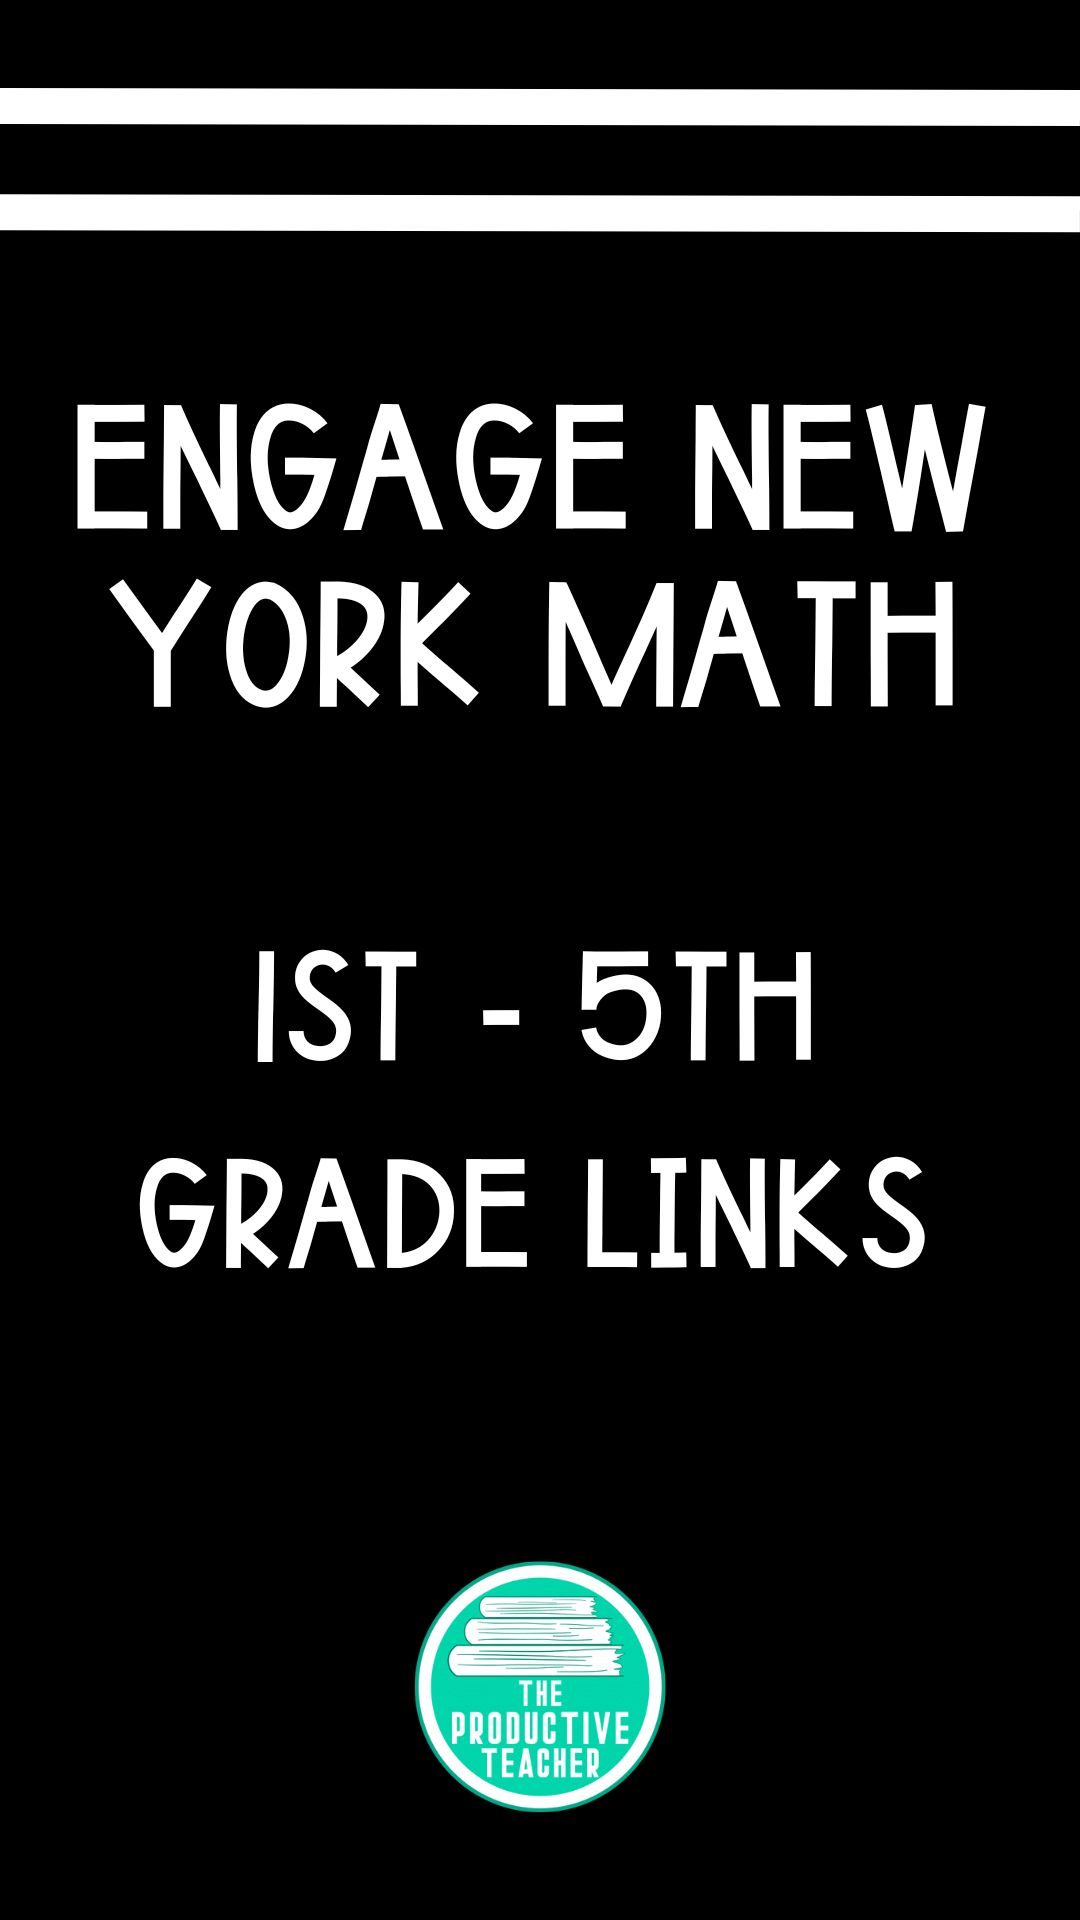 Engage New York Math Links for 1st, 2nd, 3rd, 4th, and 5th Grade